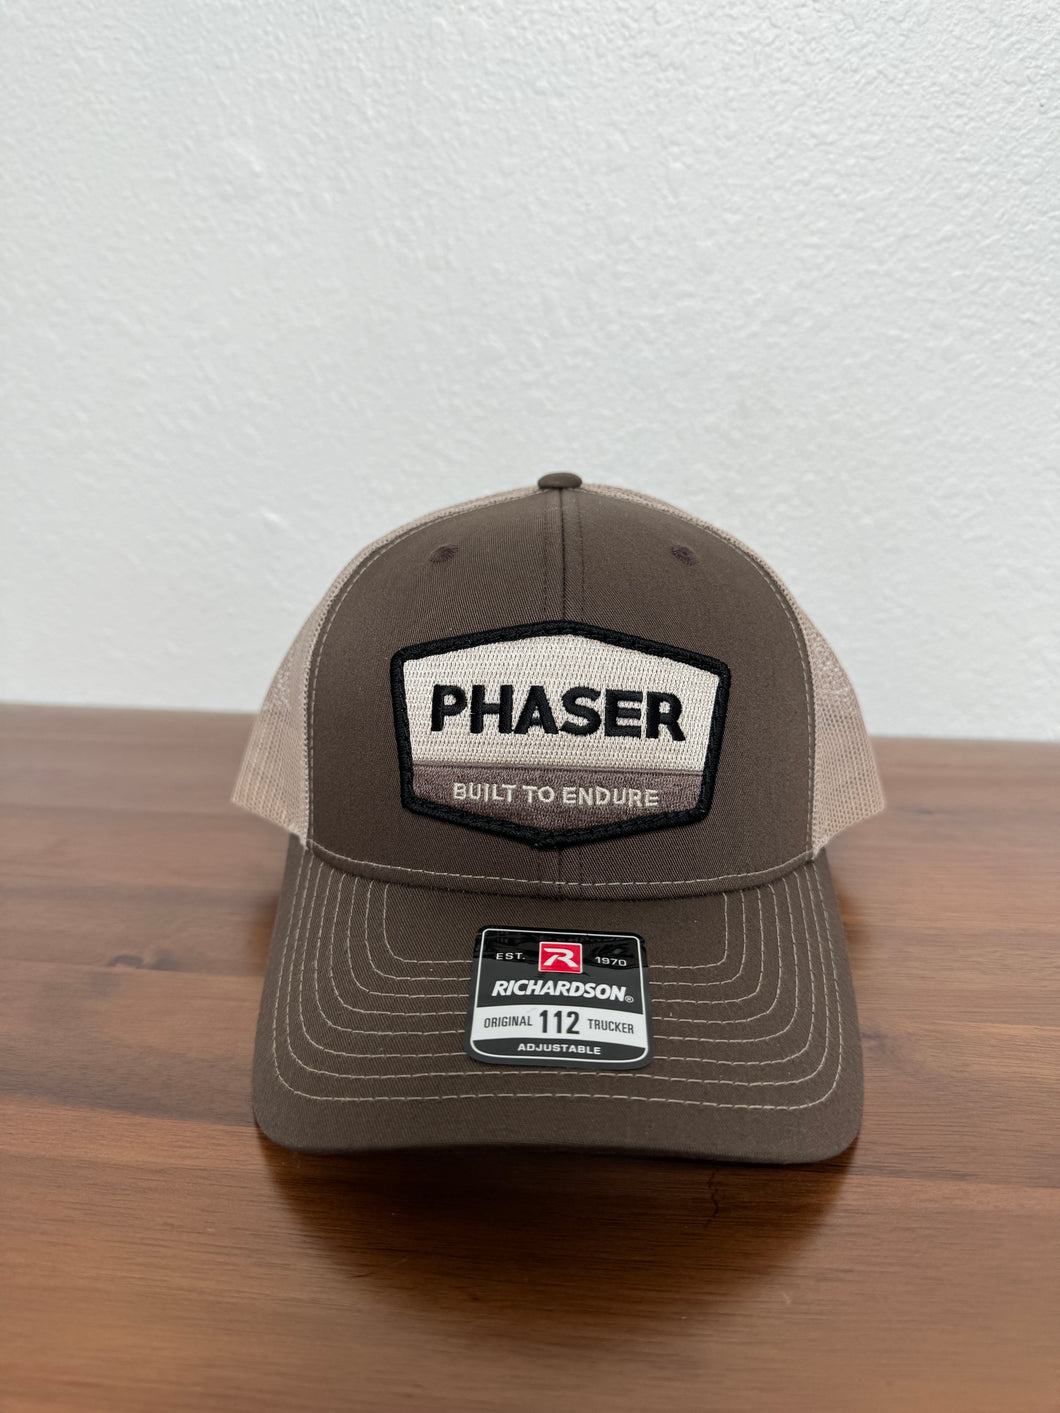 Built to Endure Patch Hat - Phaser Adventure Series